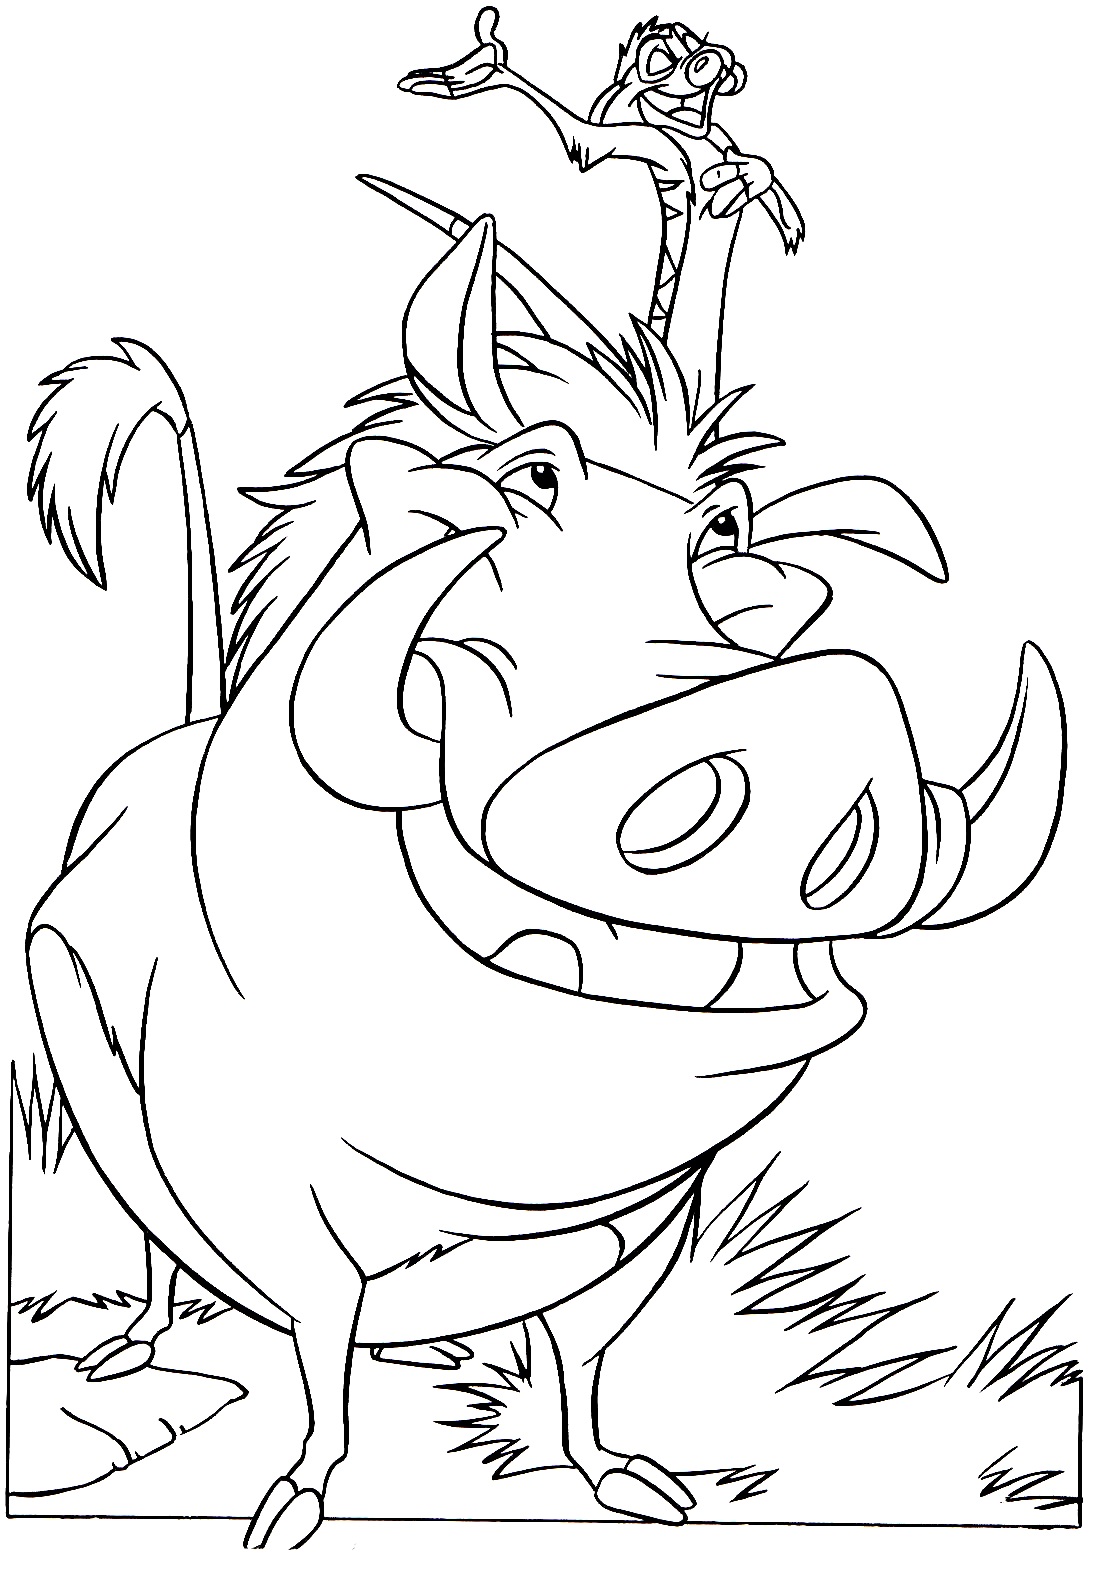 Timon and Pumbaa Coloring Pages  WONDER DAY  Coloring pages for children  and adults